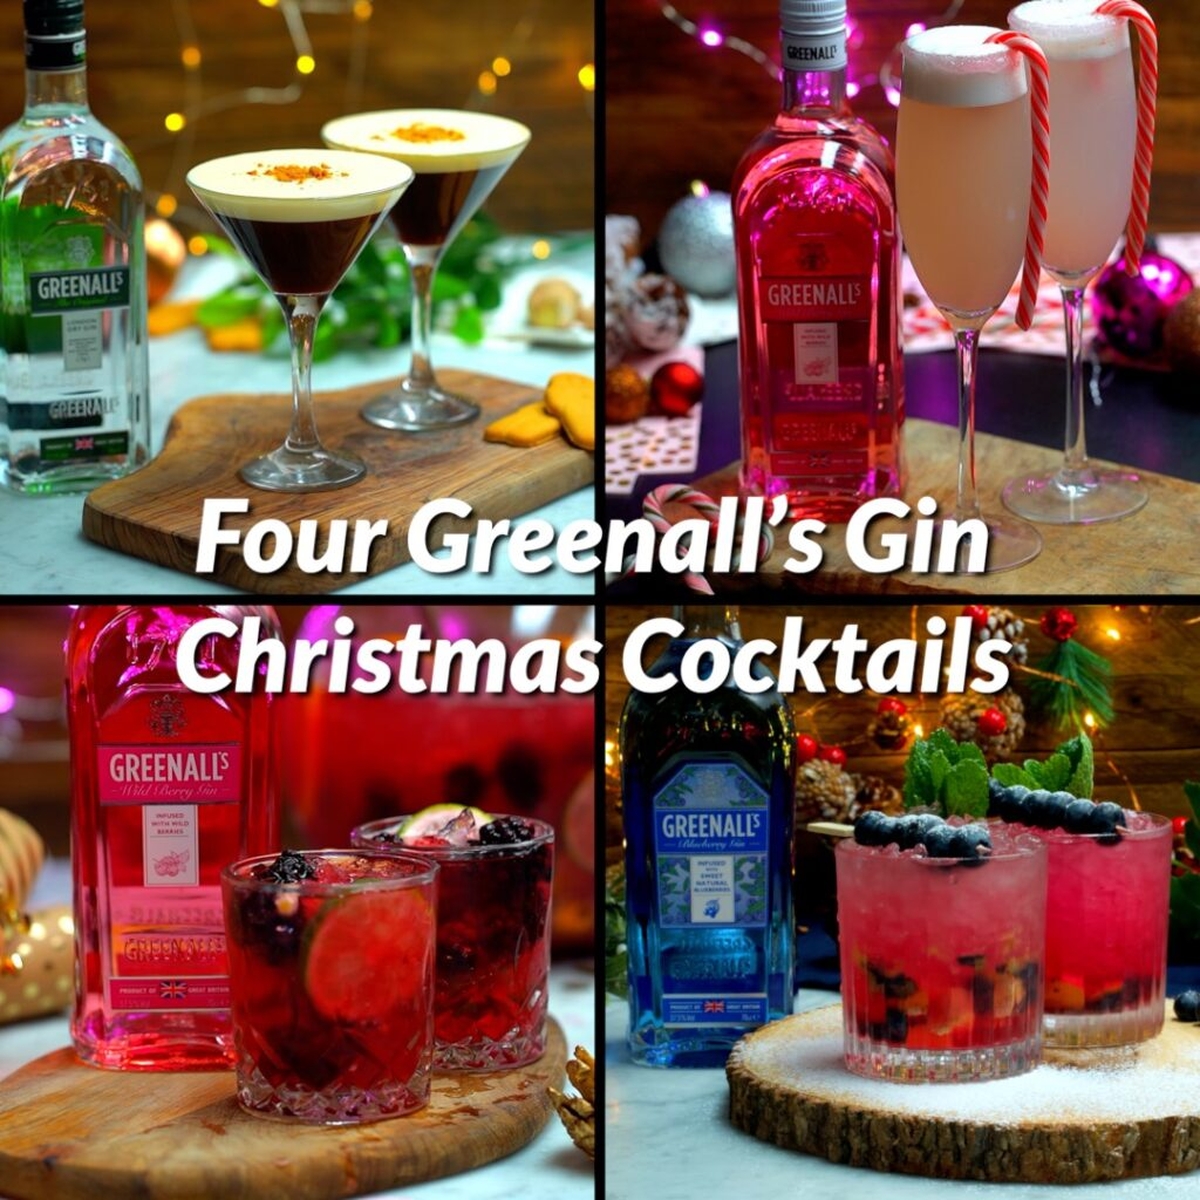 Four Greenall's Gin Christmas Cocktails